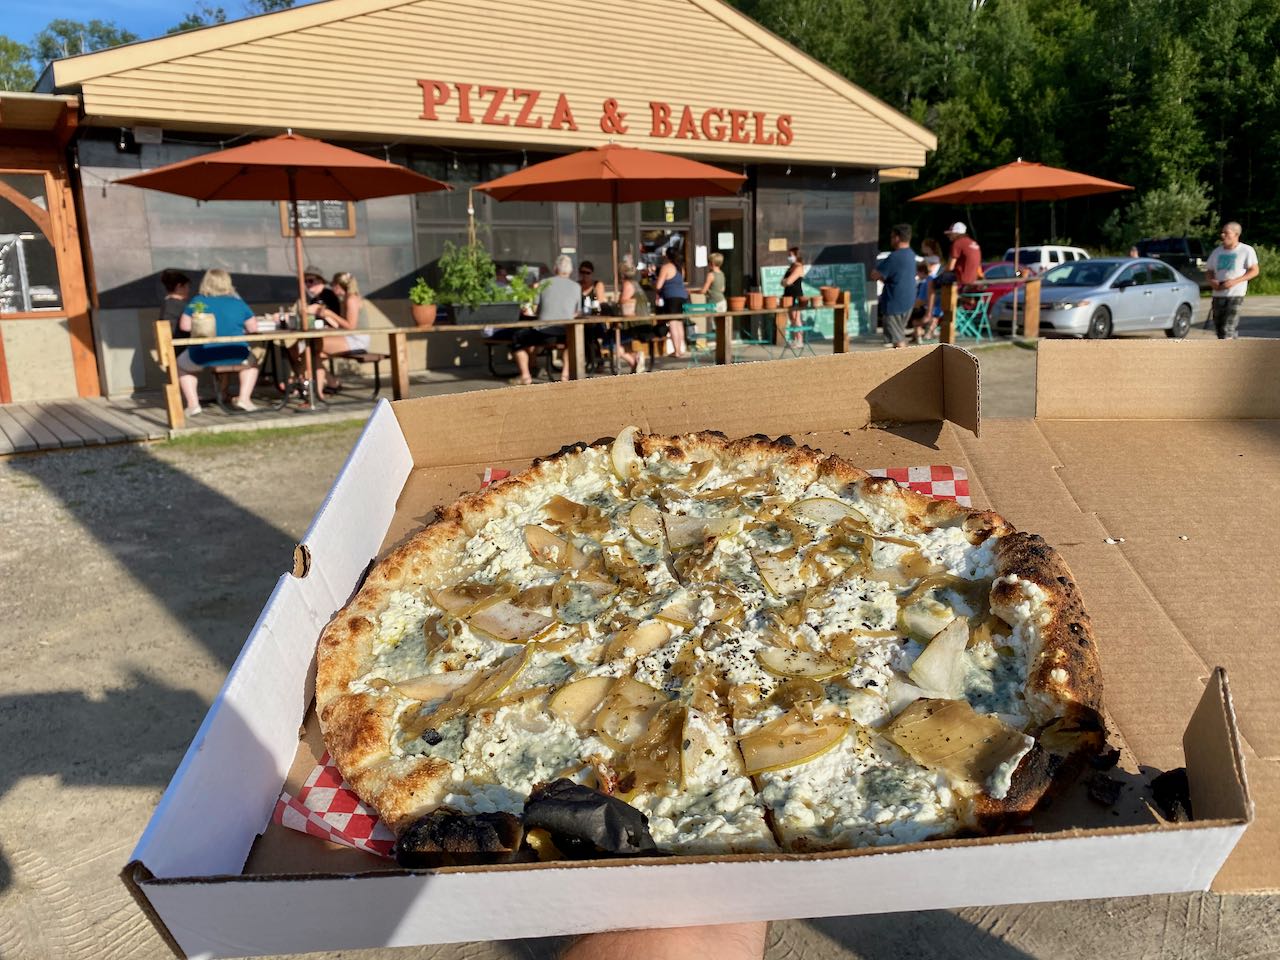 Best Restaurants in Muskoka: Pizza on Earth serves thin-crust pizza and bagels in Dorset.